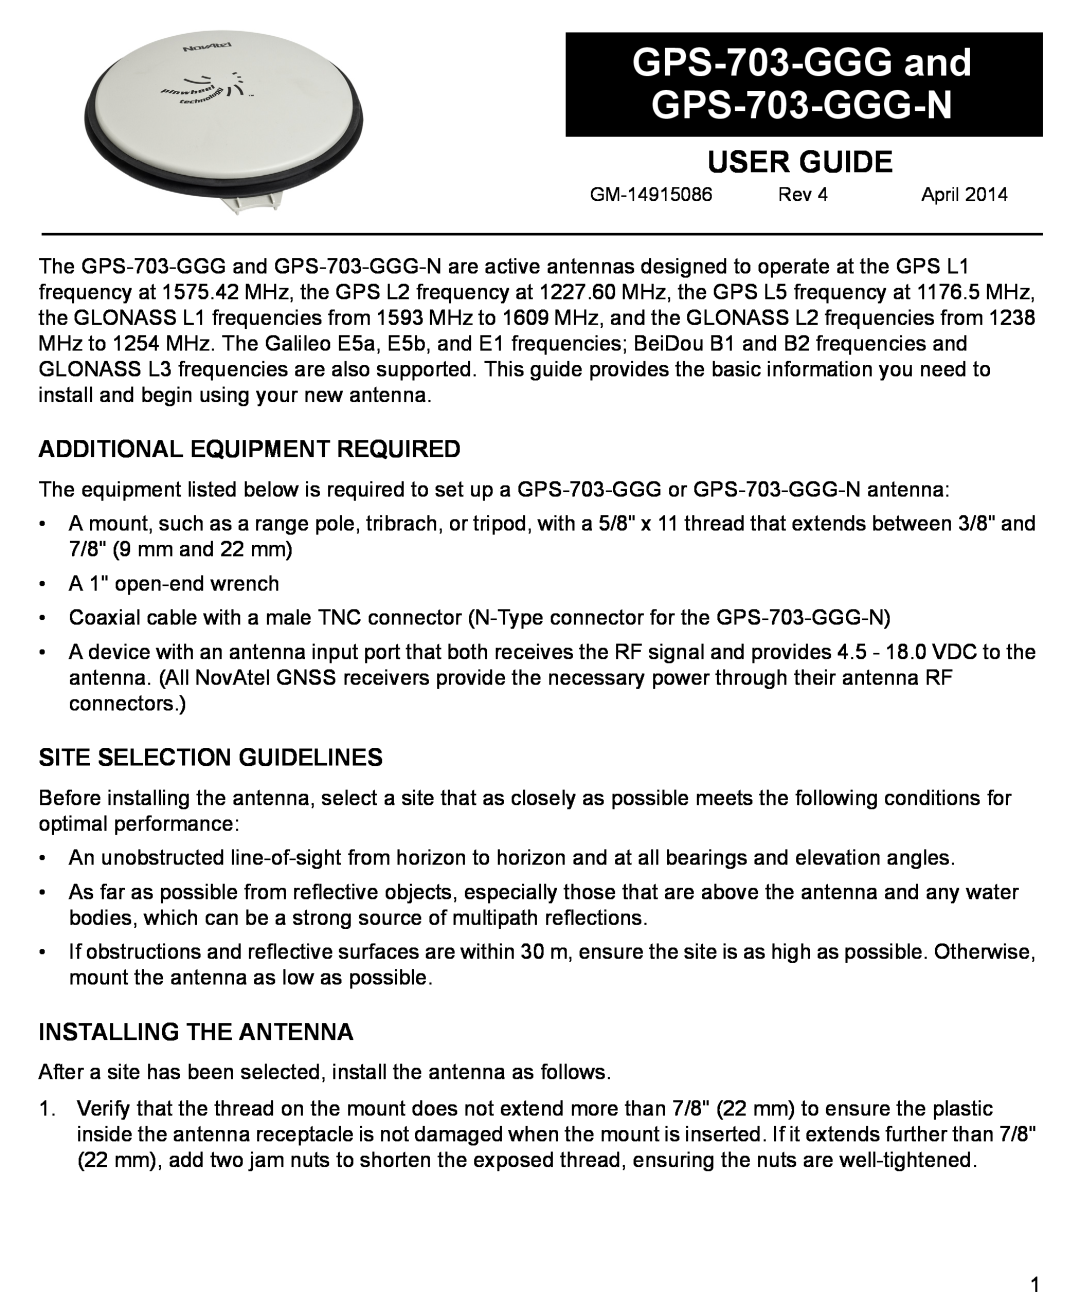 Novatel GPS-703-GGG manual Additional Equipment Required, Site Selection Guidelines, Installing The Antenna, User Guide 